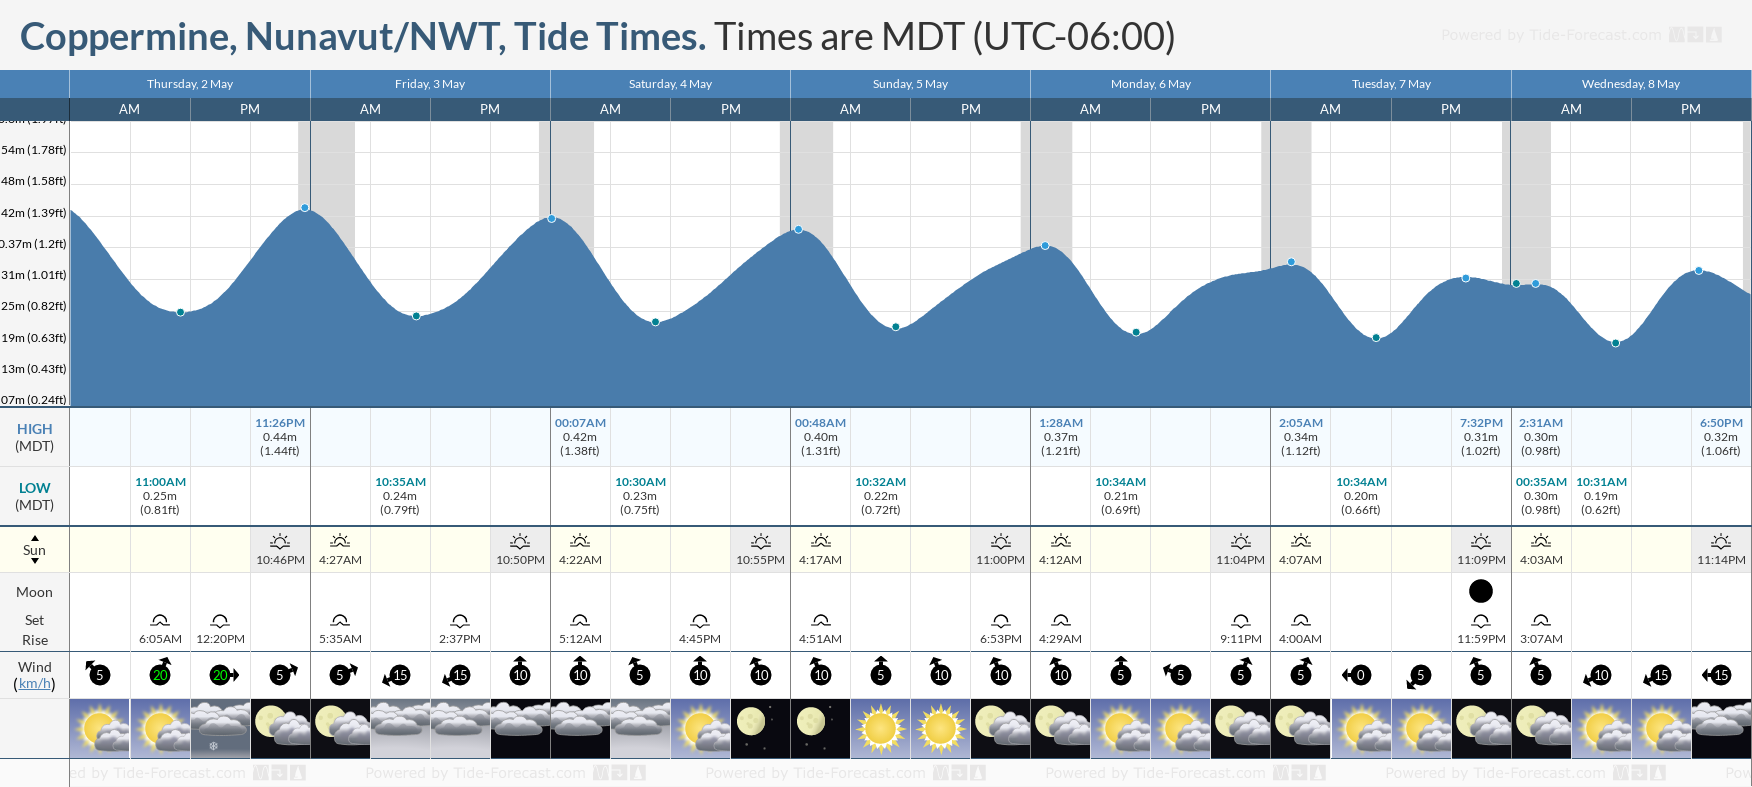 Coppermine, Nunavut/NWT Tide Chart including high and low tide times for the next 7 days